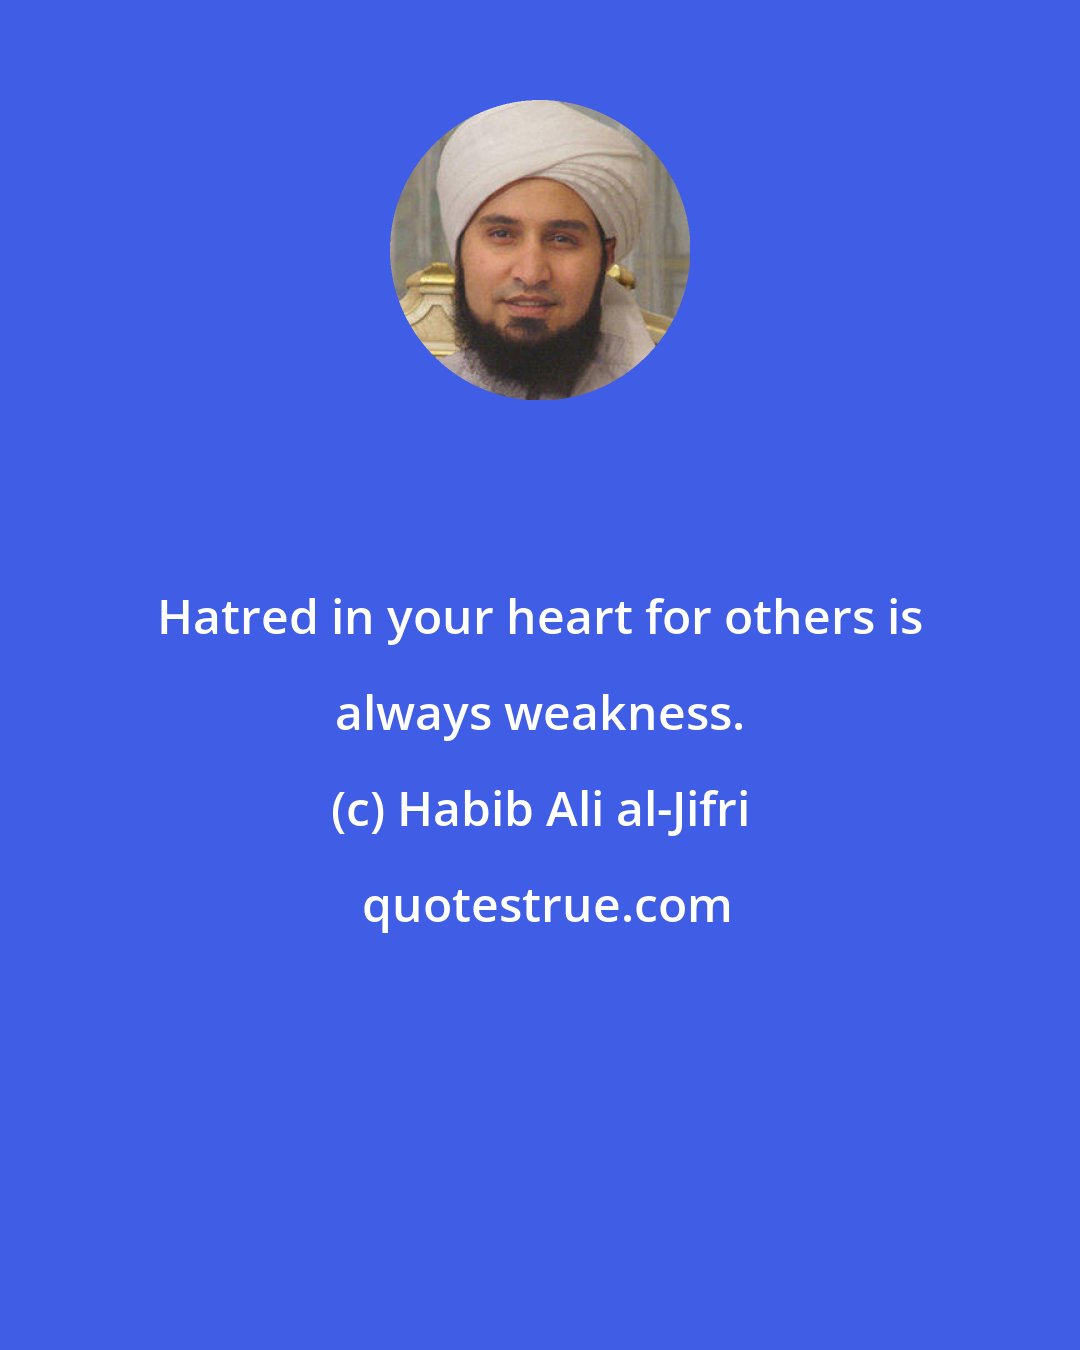 Habib Ali al-Jifri: Hatred in your heart for others is always weakness.